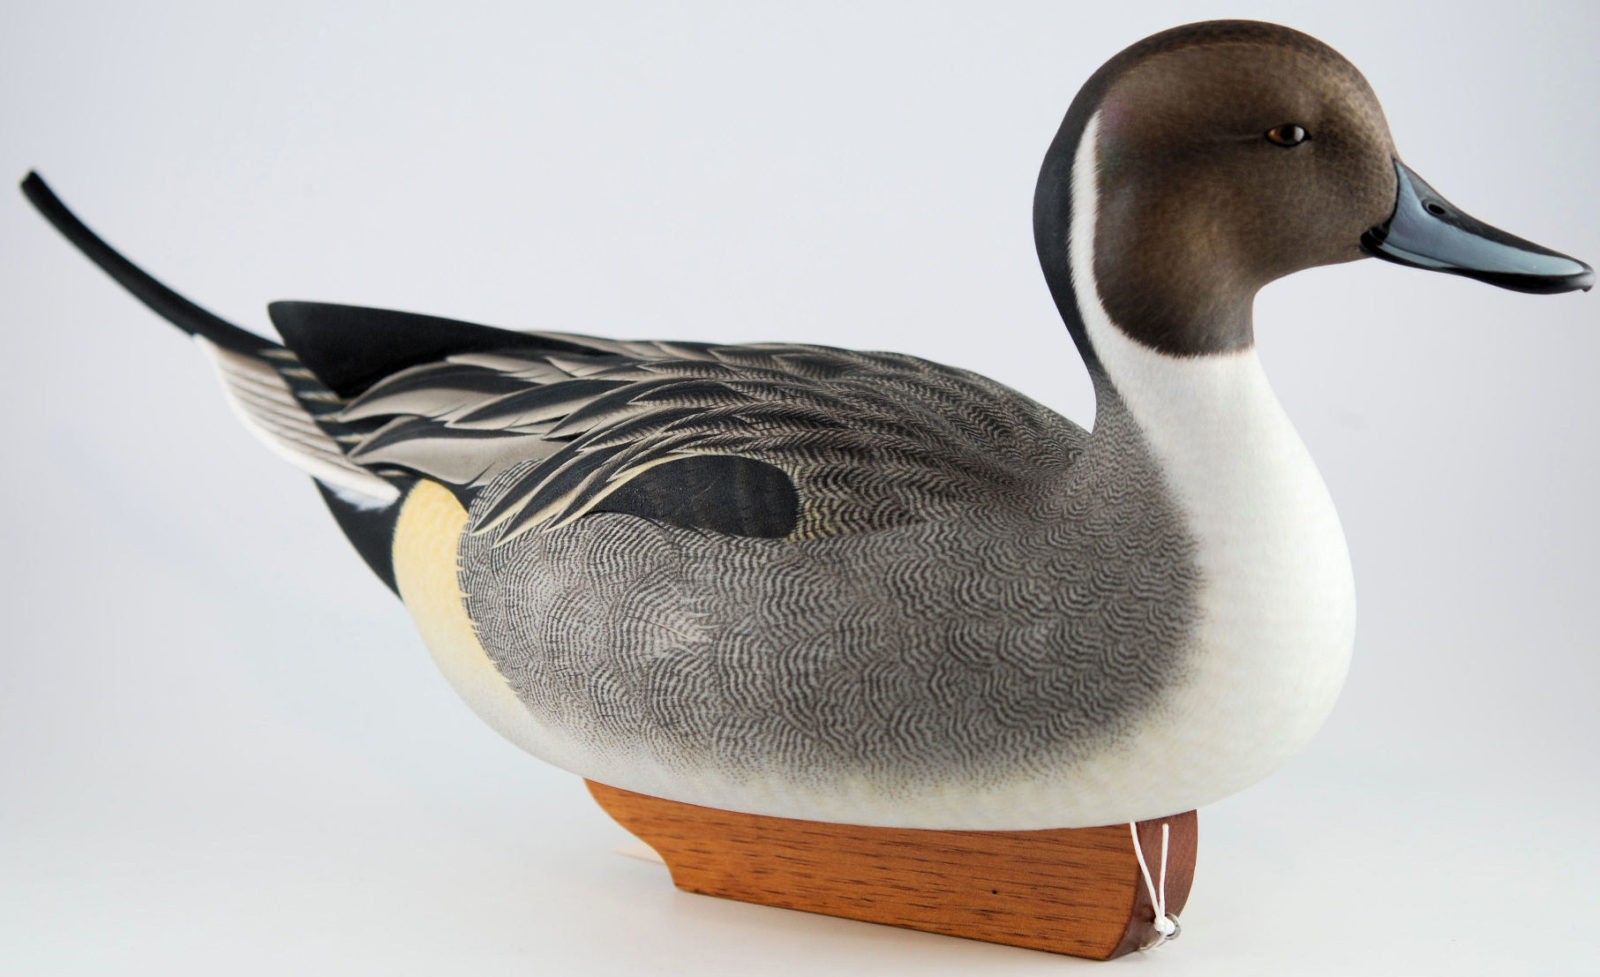 4th Annual Decoy & Waterfowl Arts Auction Day 2 - September 22nd 2012